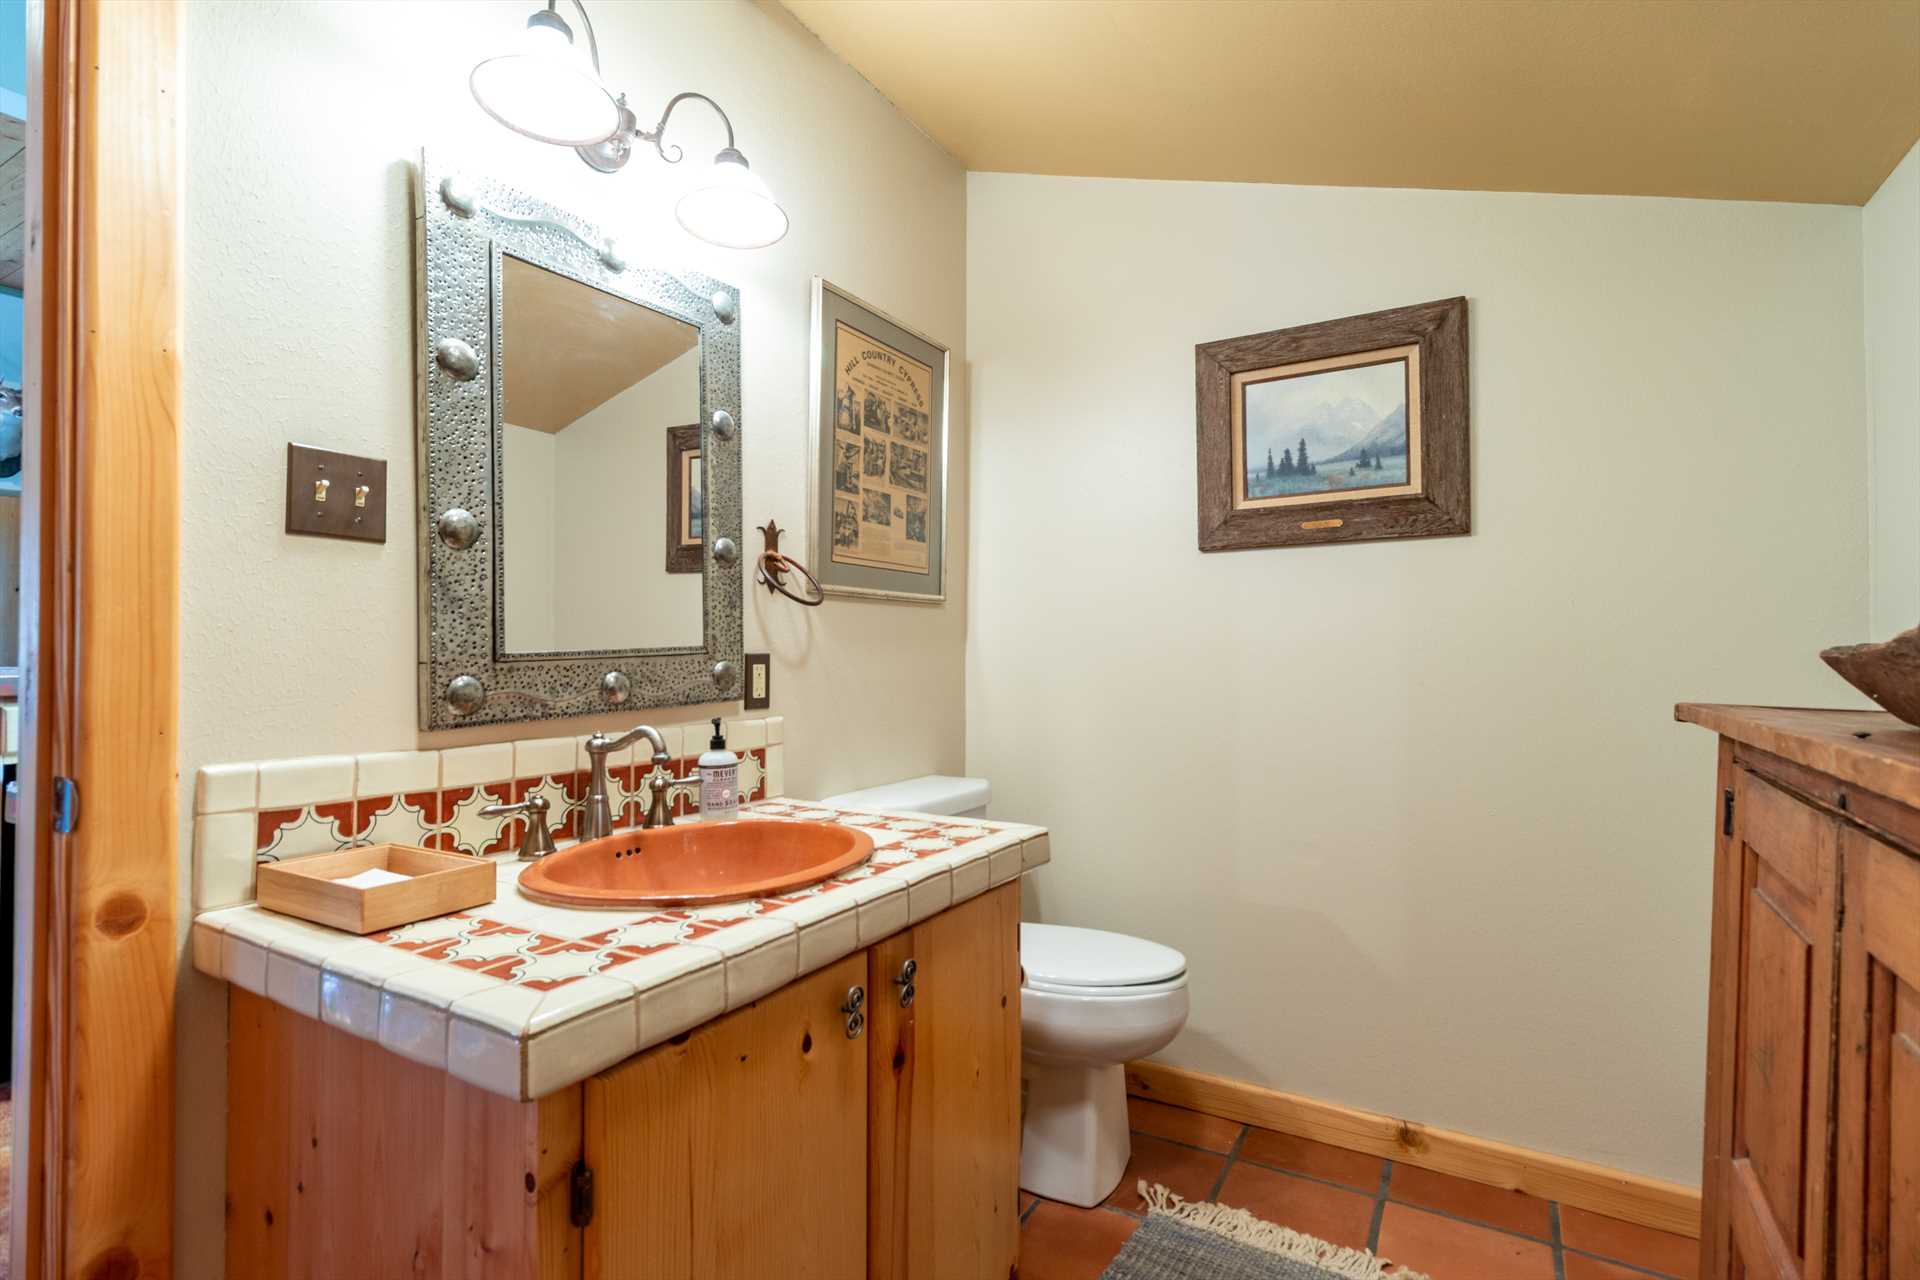                                                 For cleanup convenience, the Agave includes a clean half-bath, complete with fresh linens and toiletry necessities.